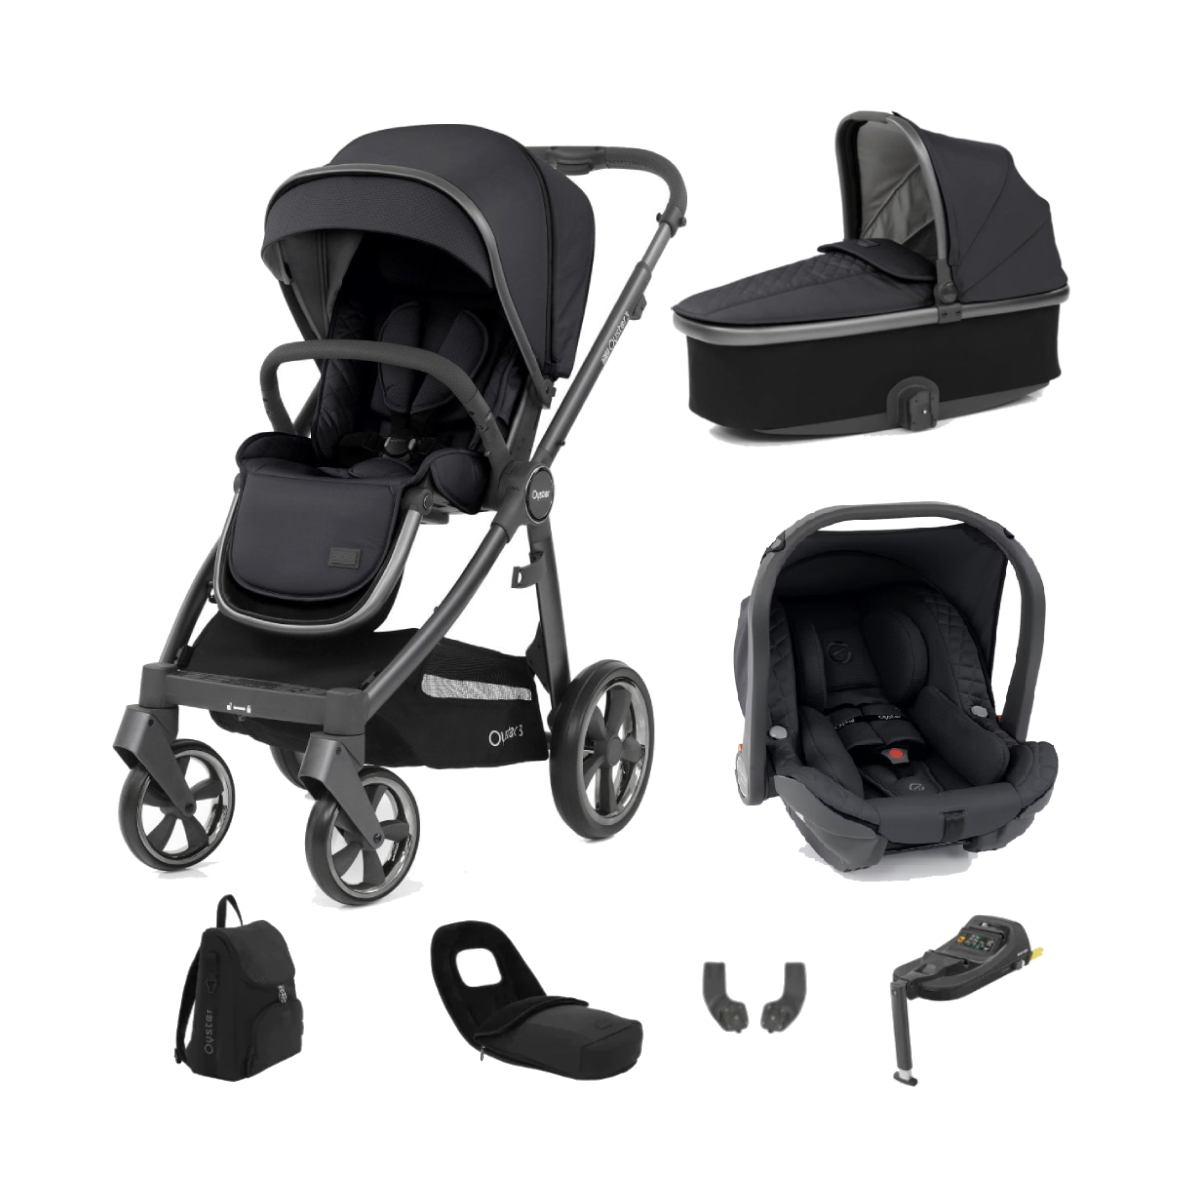 Babystyle Oyster 3 City Grey Chassis 3in1 Travel System